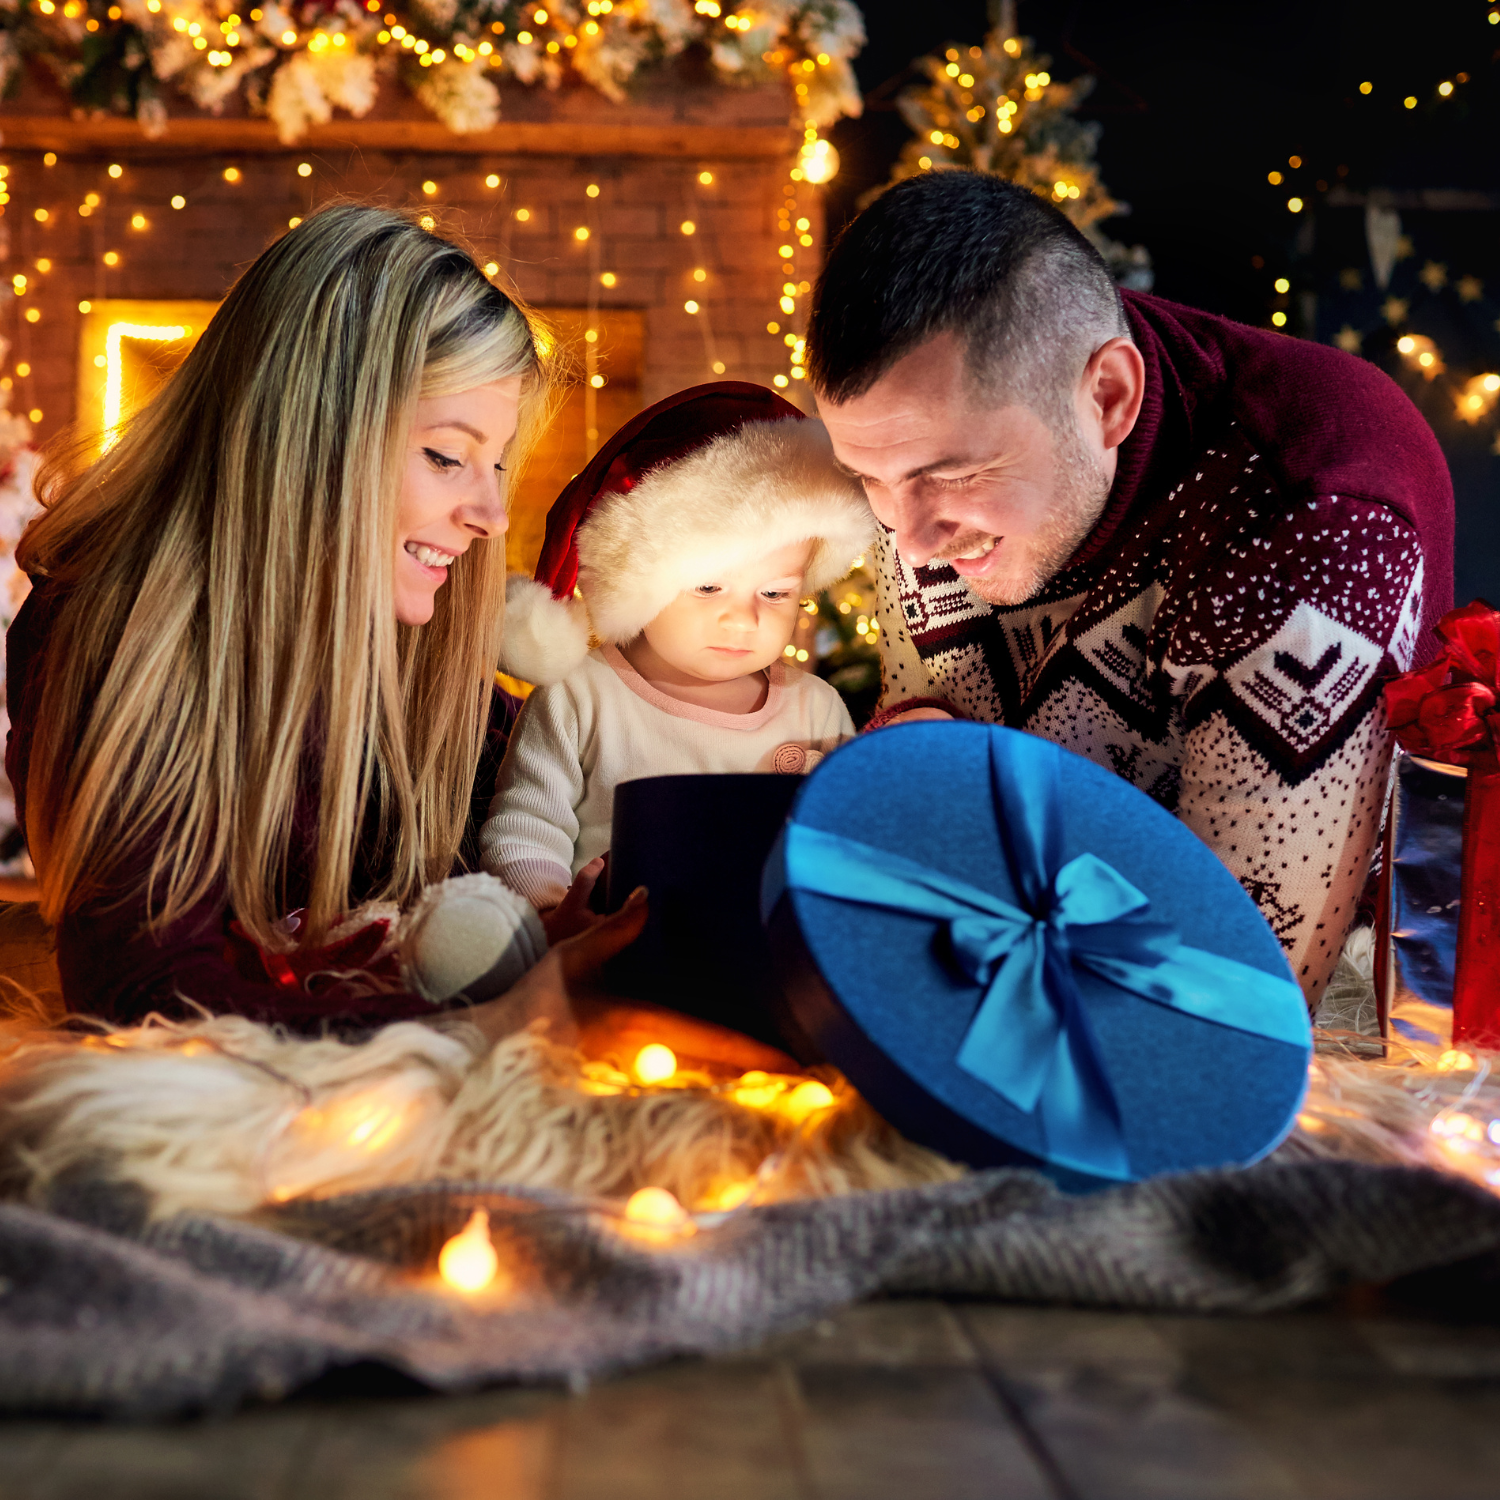 Mum, dad and baby wearing a santa hat looking inside a gift box surrounded by twinkling fairy lights | Family Christmas - Clair de Lune UK